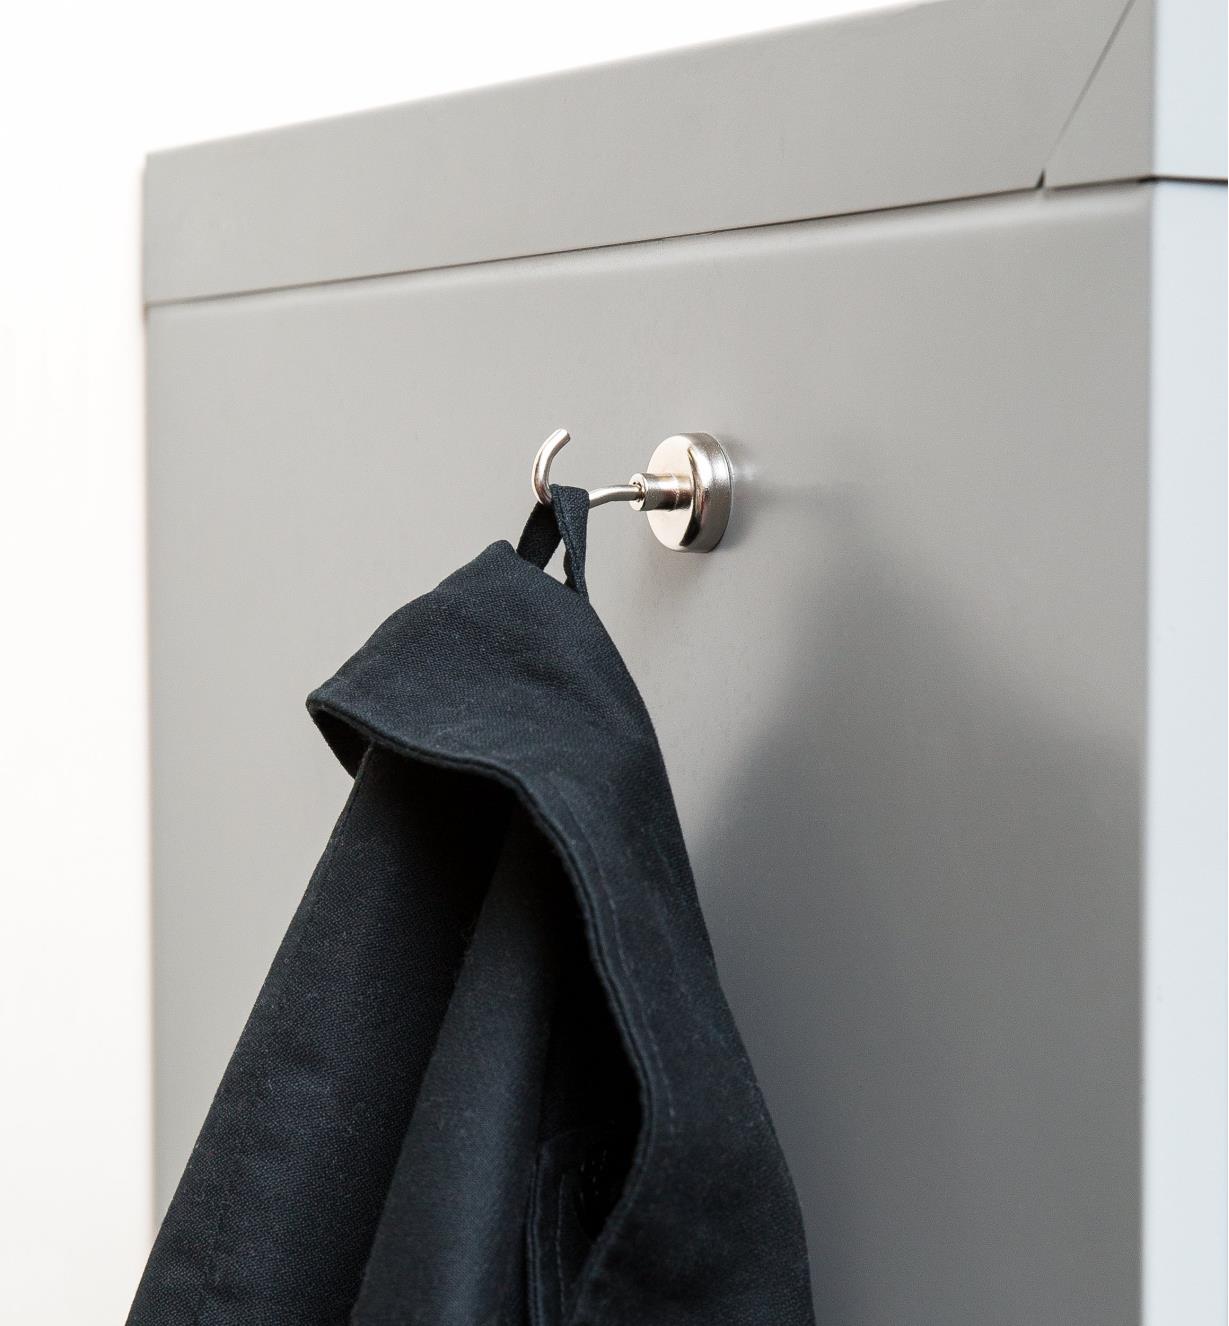 A jacket hanging on a magnet-mounted hook attached to a metal cabinet